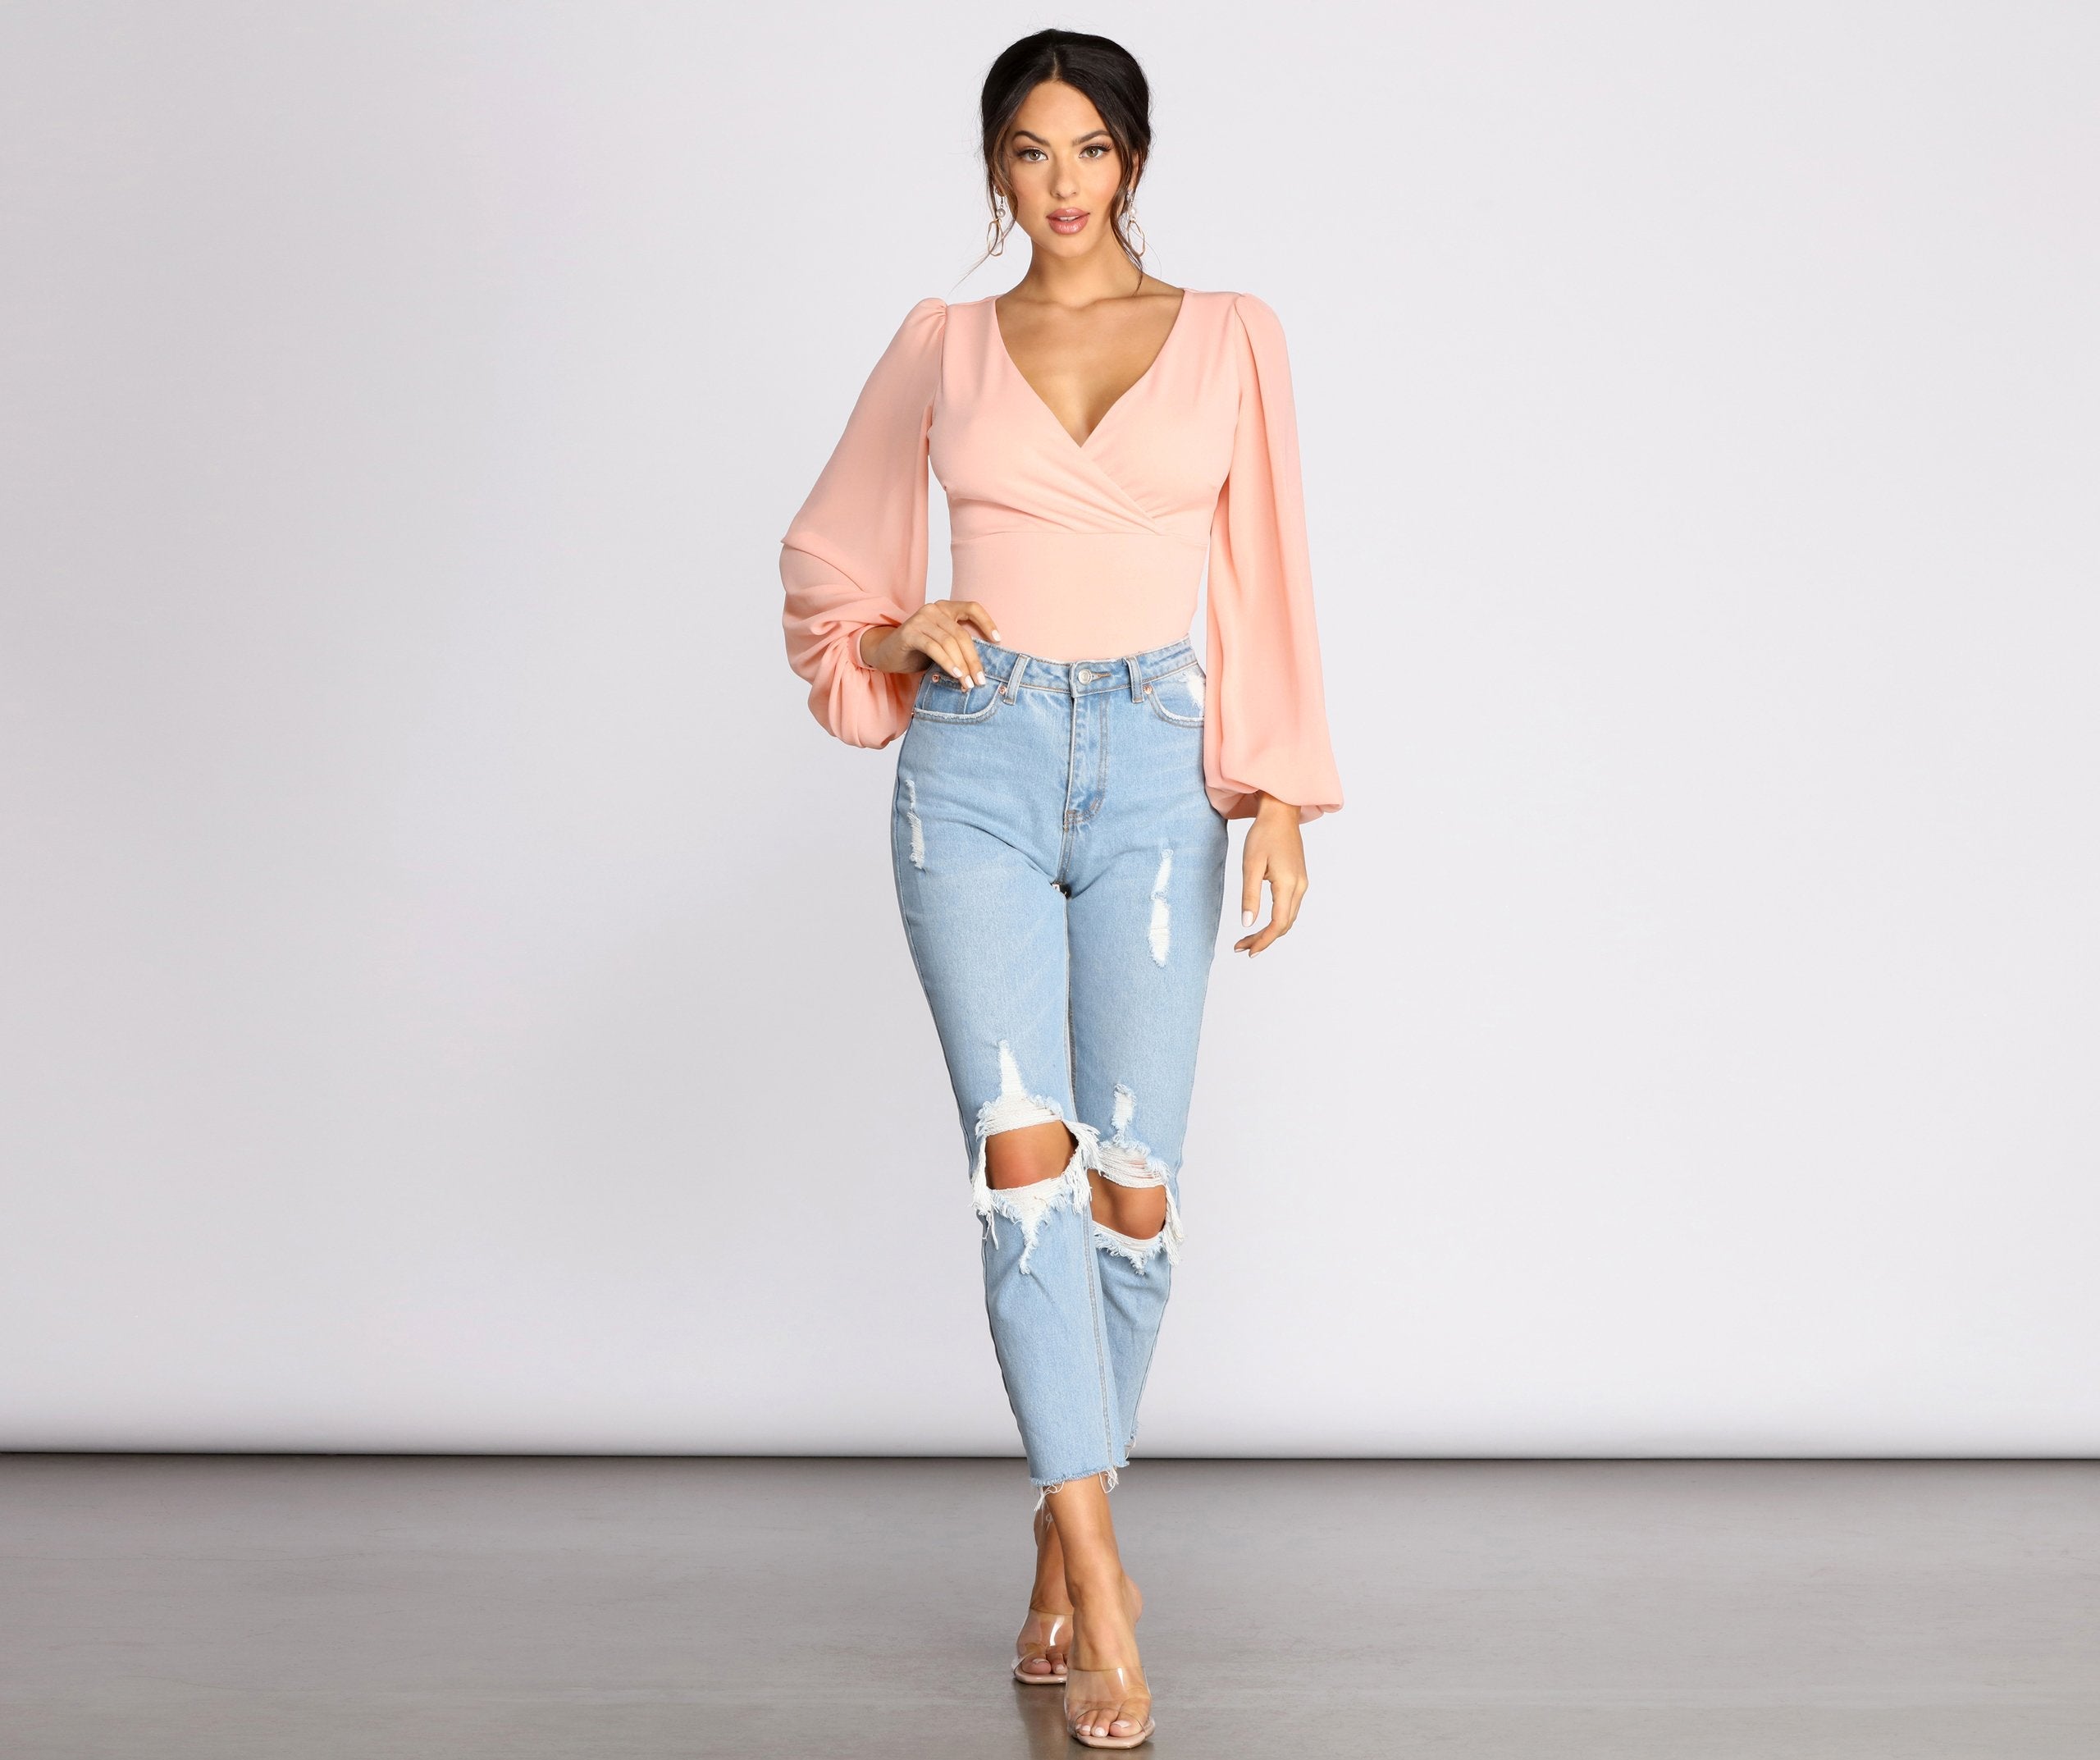 Classic Chiffon Sleeve Wrap Front Blouse - Lady Occasions